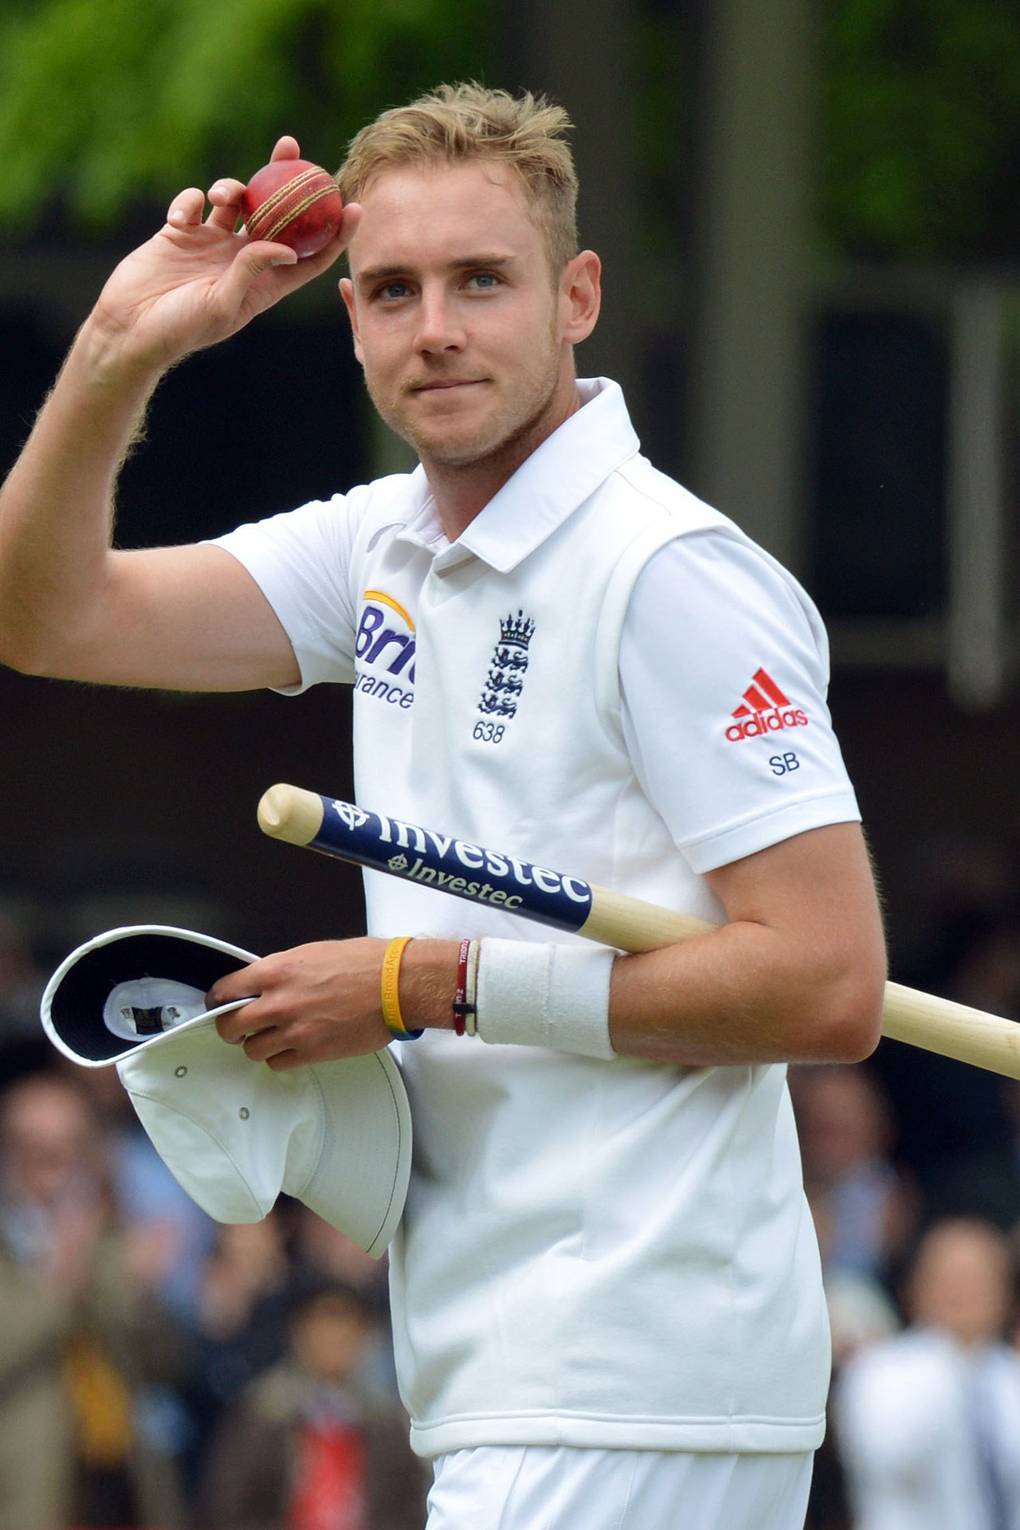 The Ashes' Hottest & Cricketers Broad & more